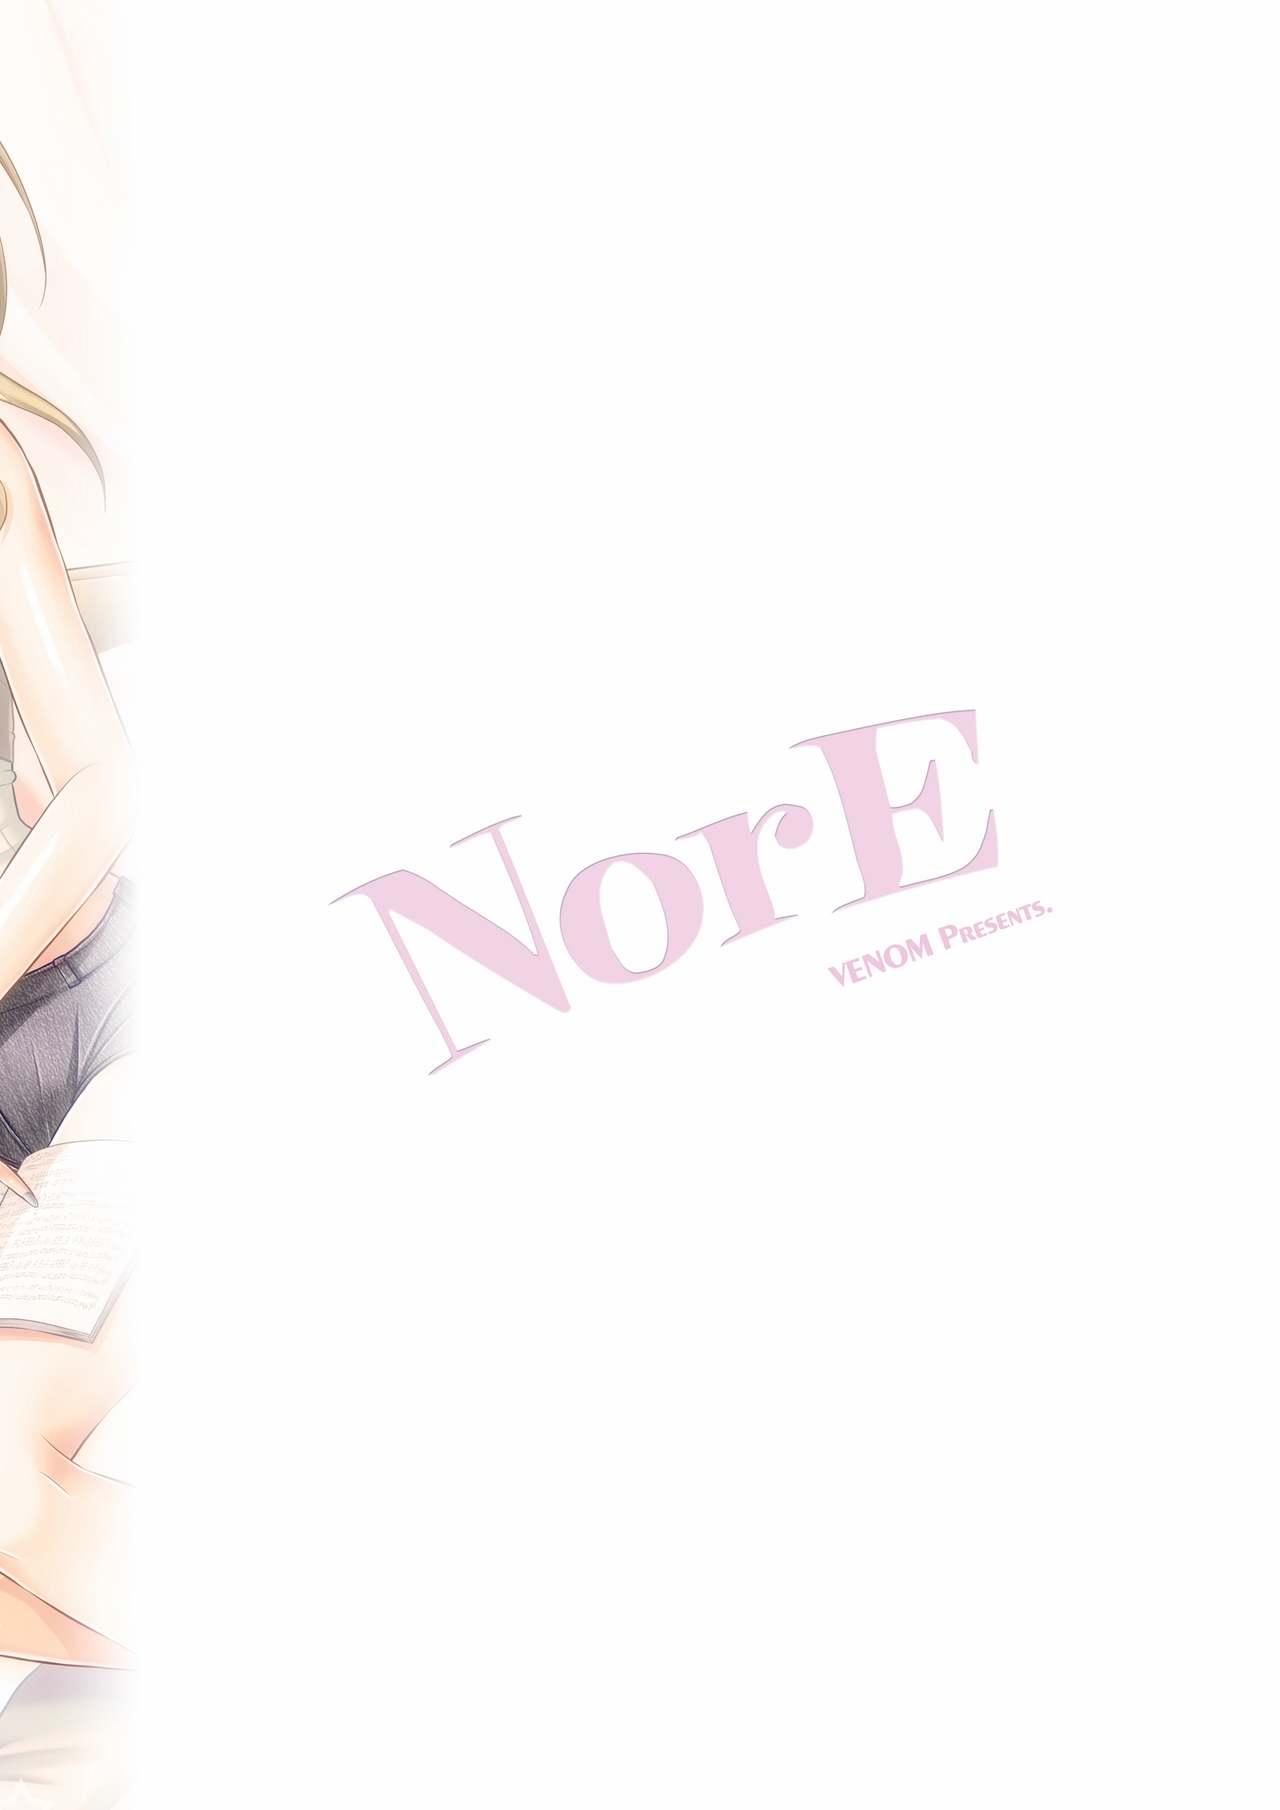 NorE 23